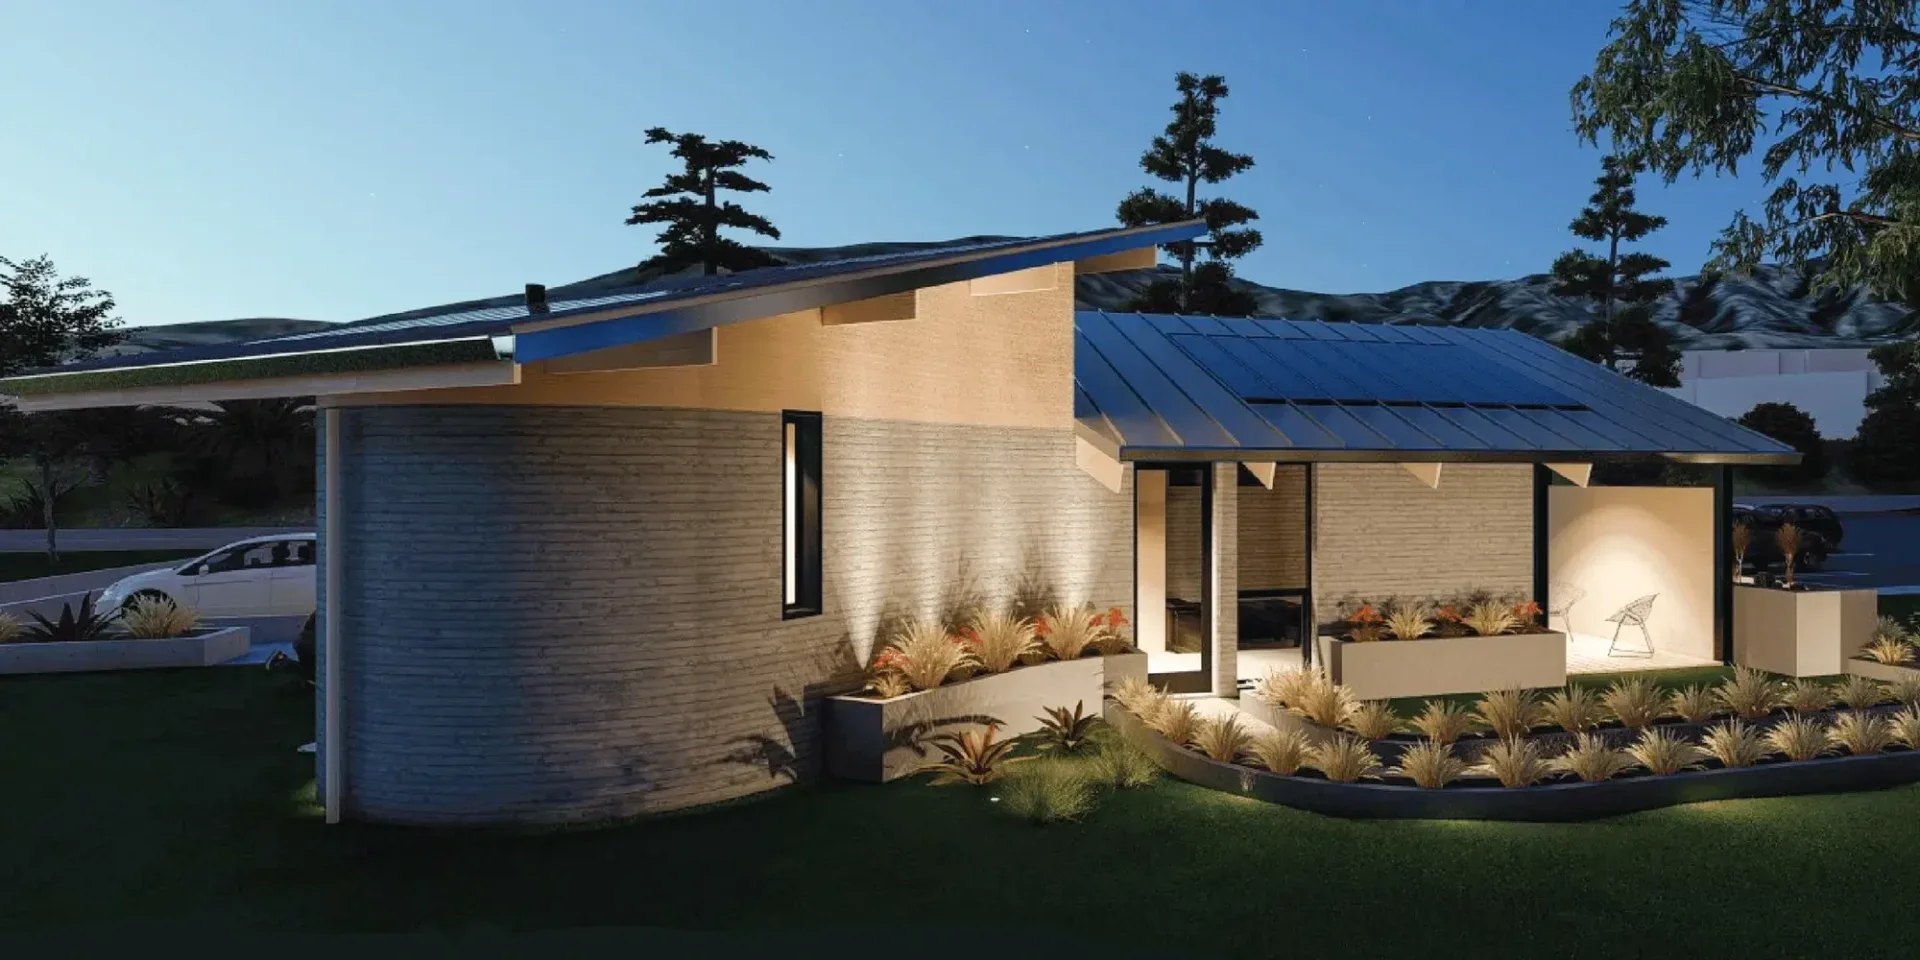 Rendering illustrating the innovative design finalized before 3D printing the net-zero energy home.
